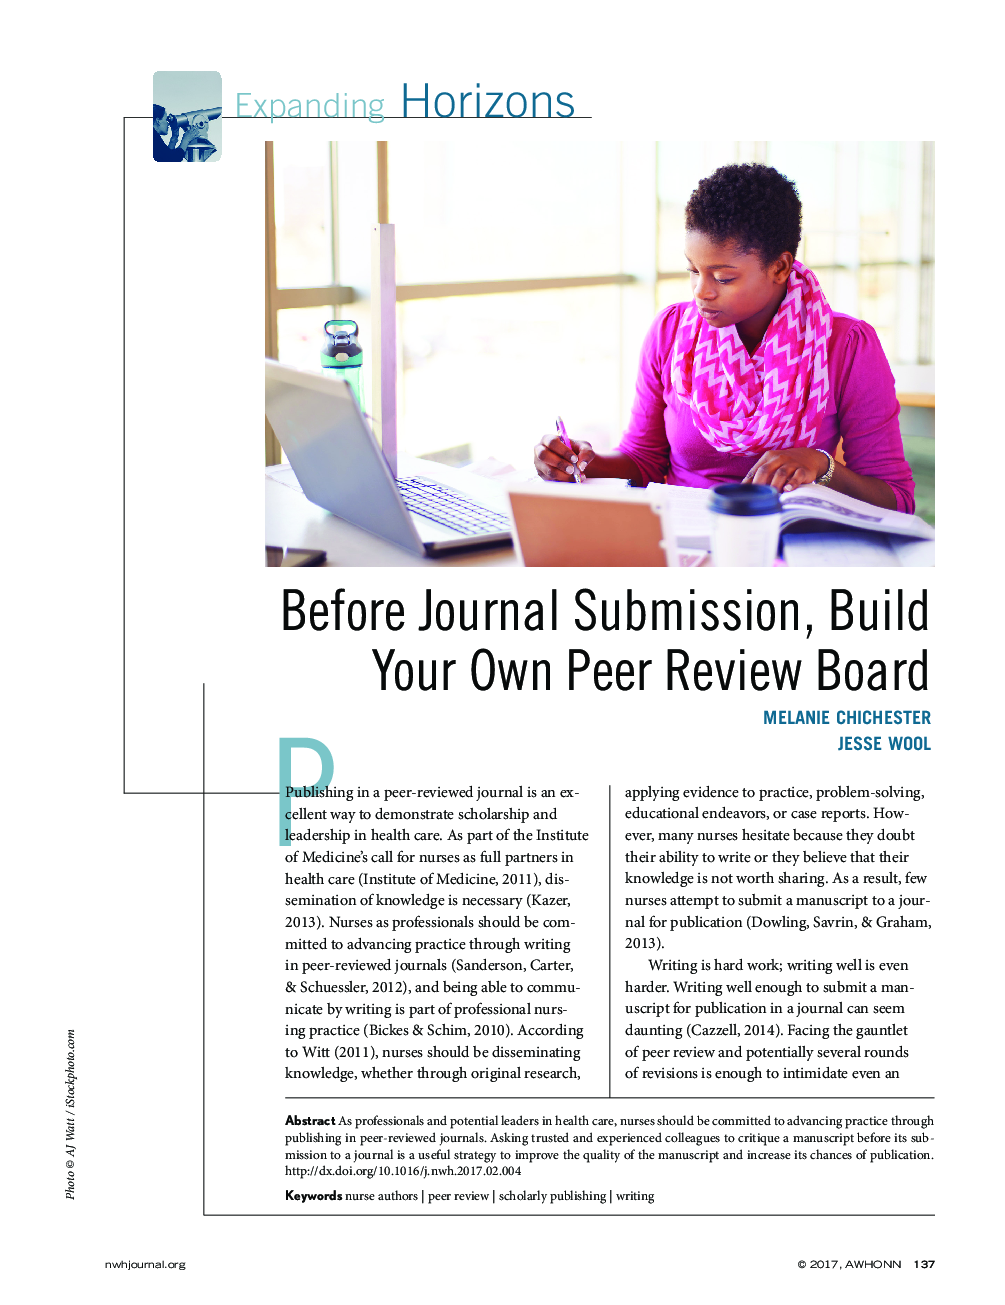 Before Journal Submission, Build Your Own Peer Review Board